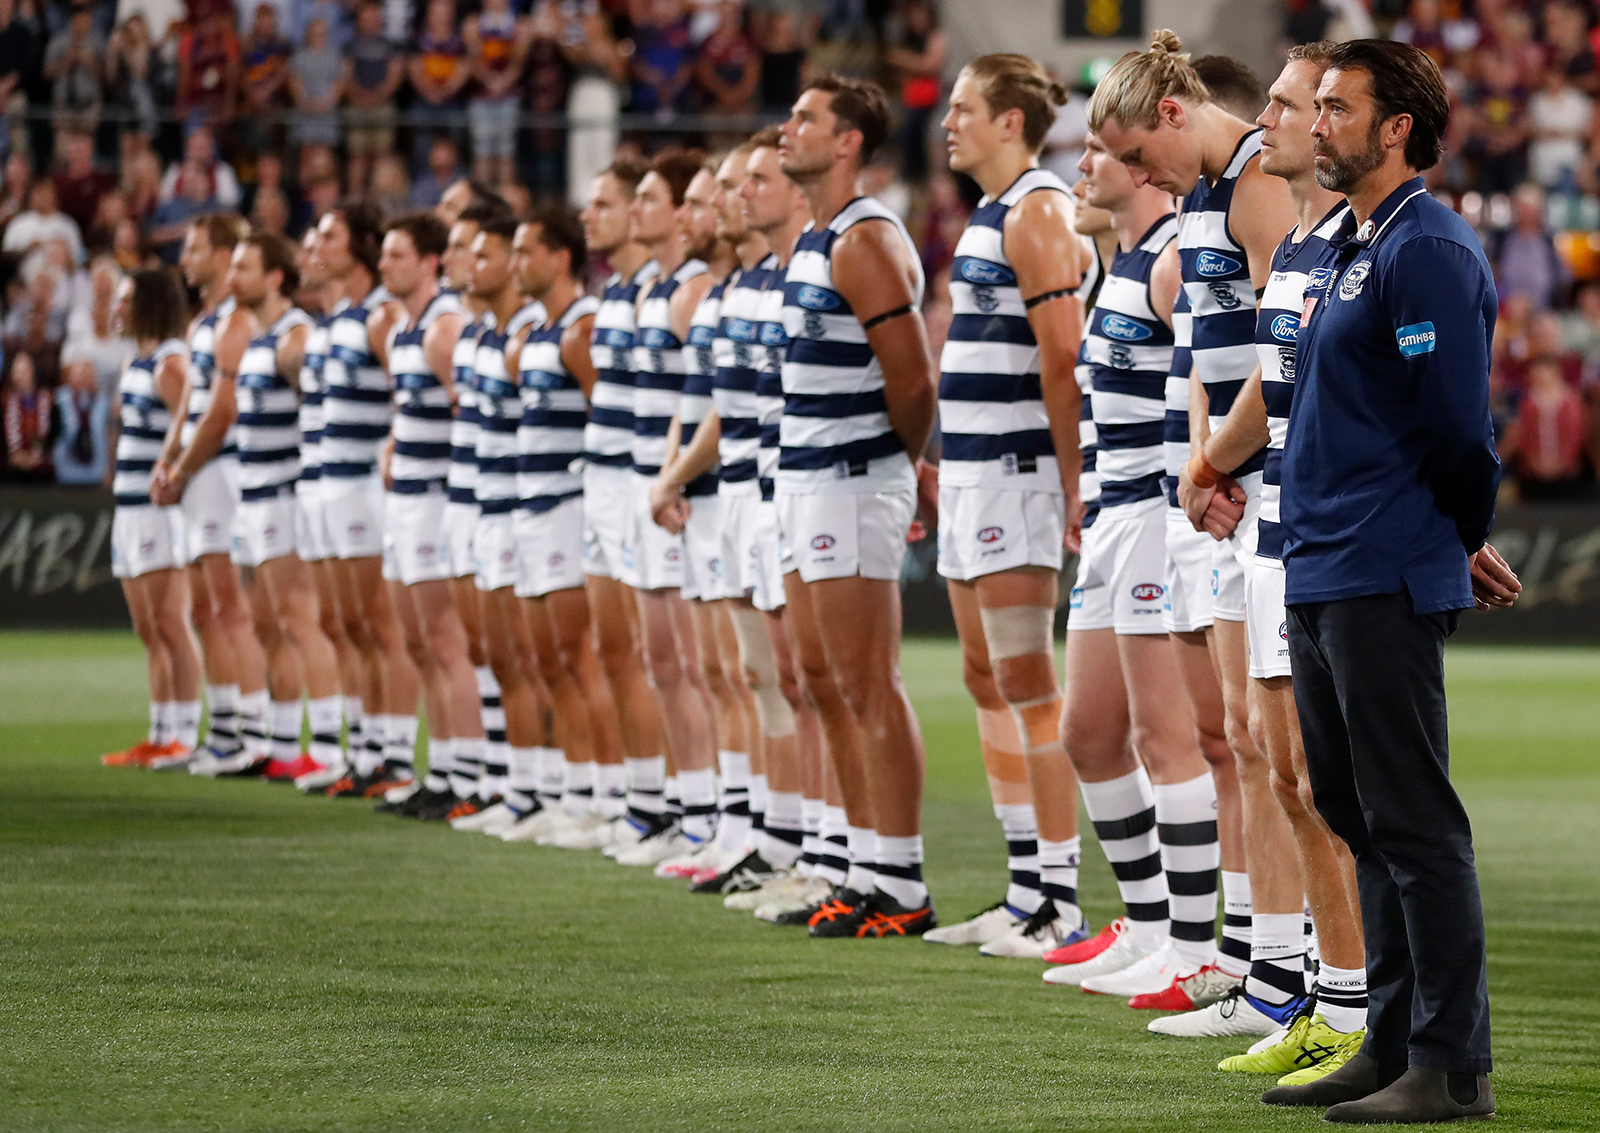 The Geelong Cats line up for the national anthem during the 2020 AFL Second Preliminary Final match with  the Brisbane Lions at The Gabba in Brisbane, Australia, on October 17.